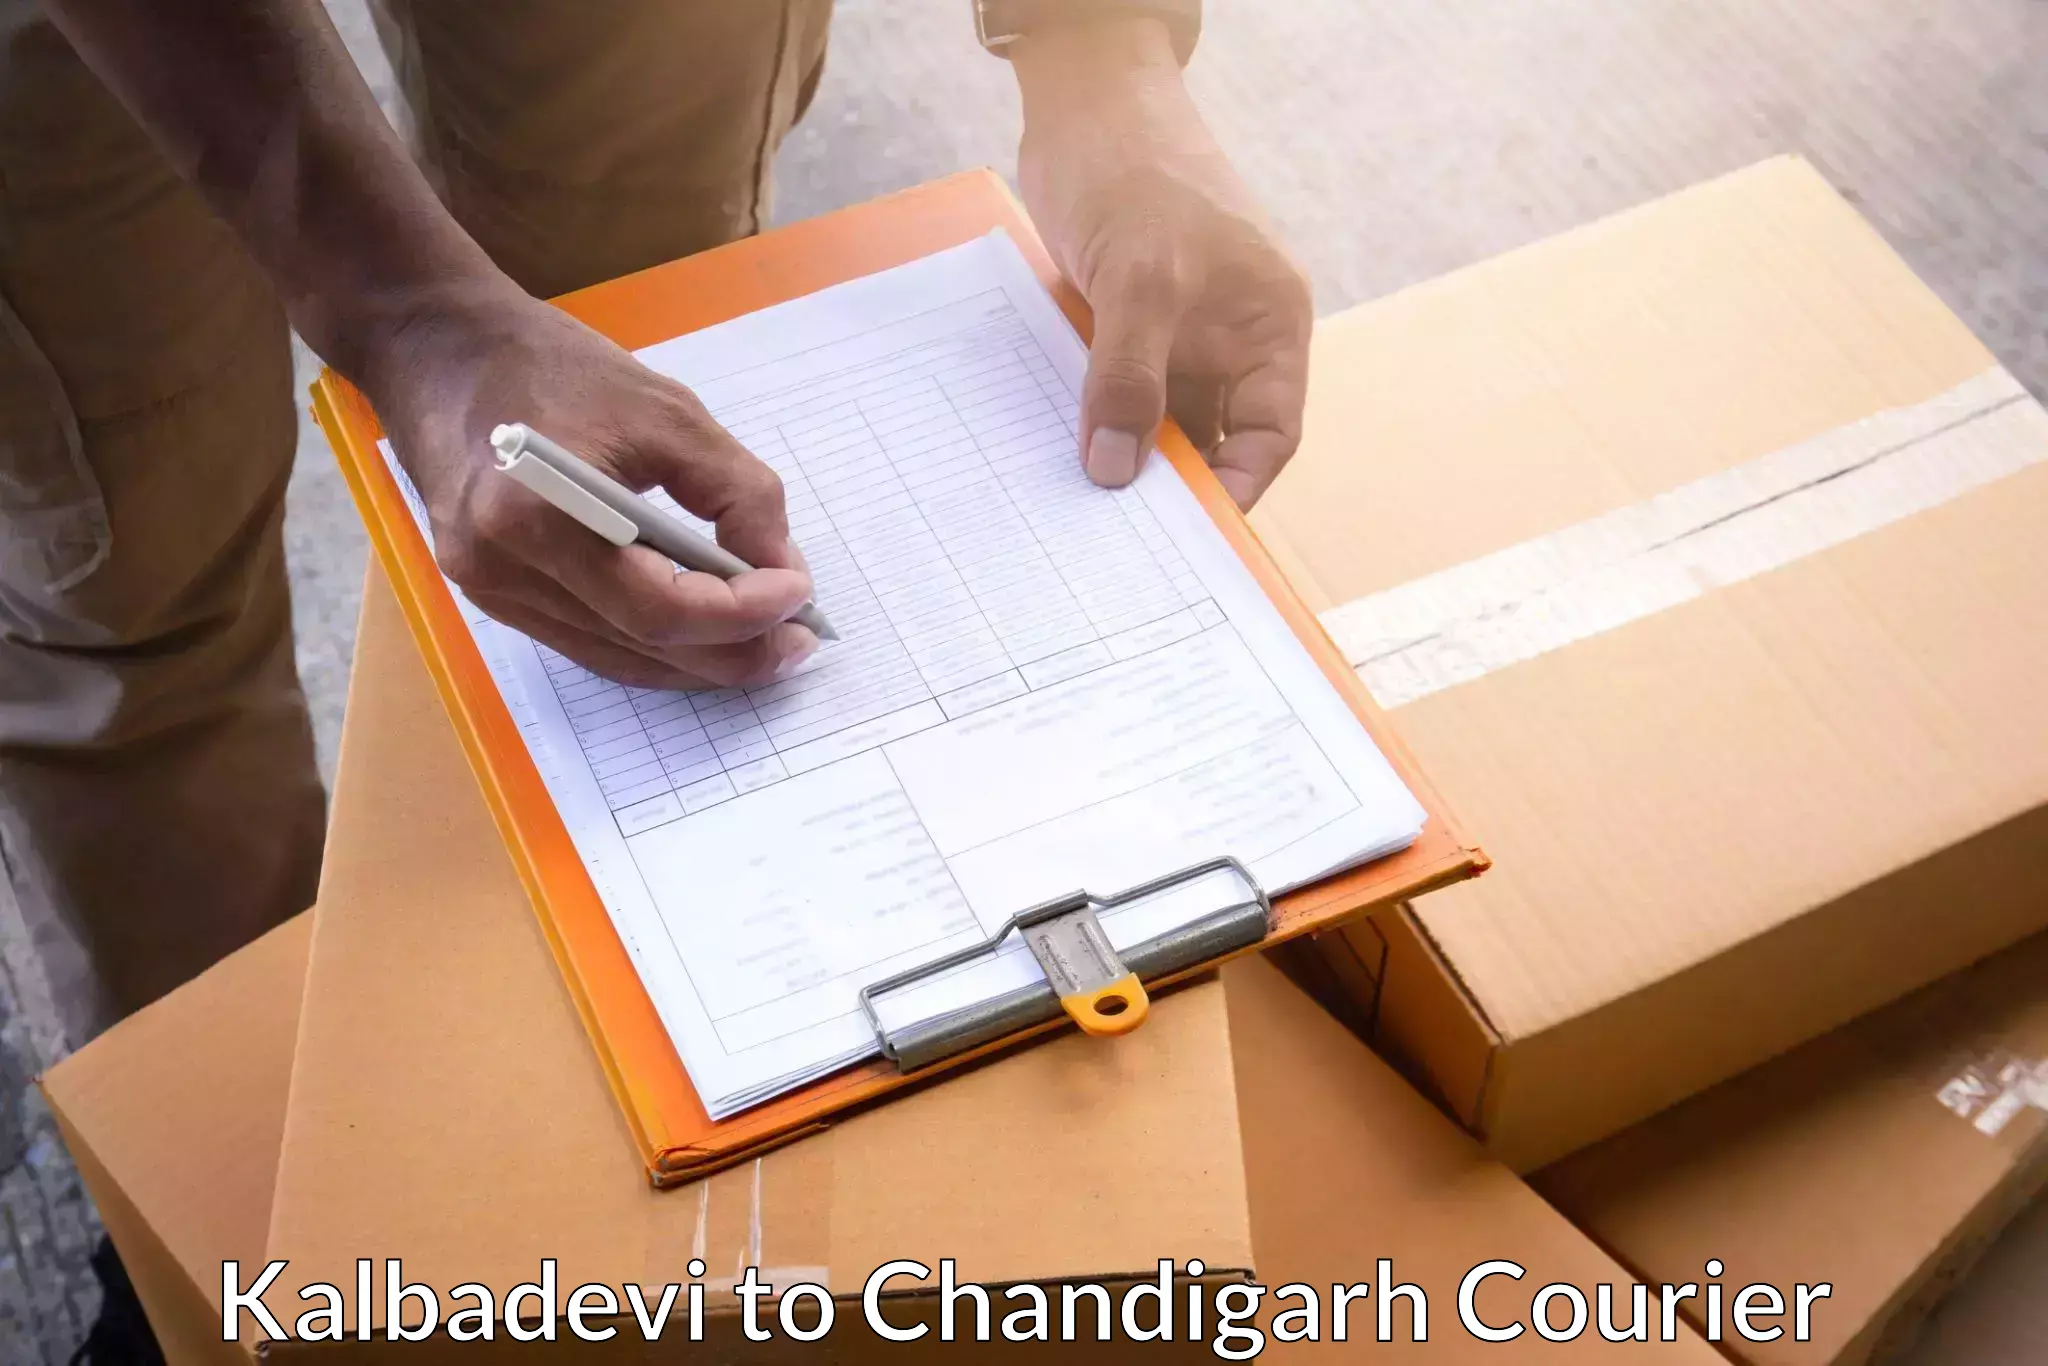 Global courier networks Kalbadevi to Chandigarh